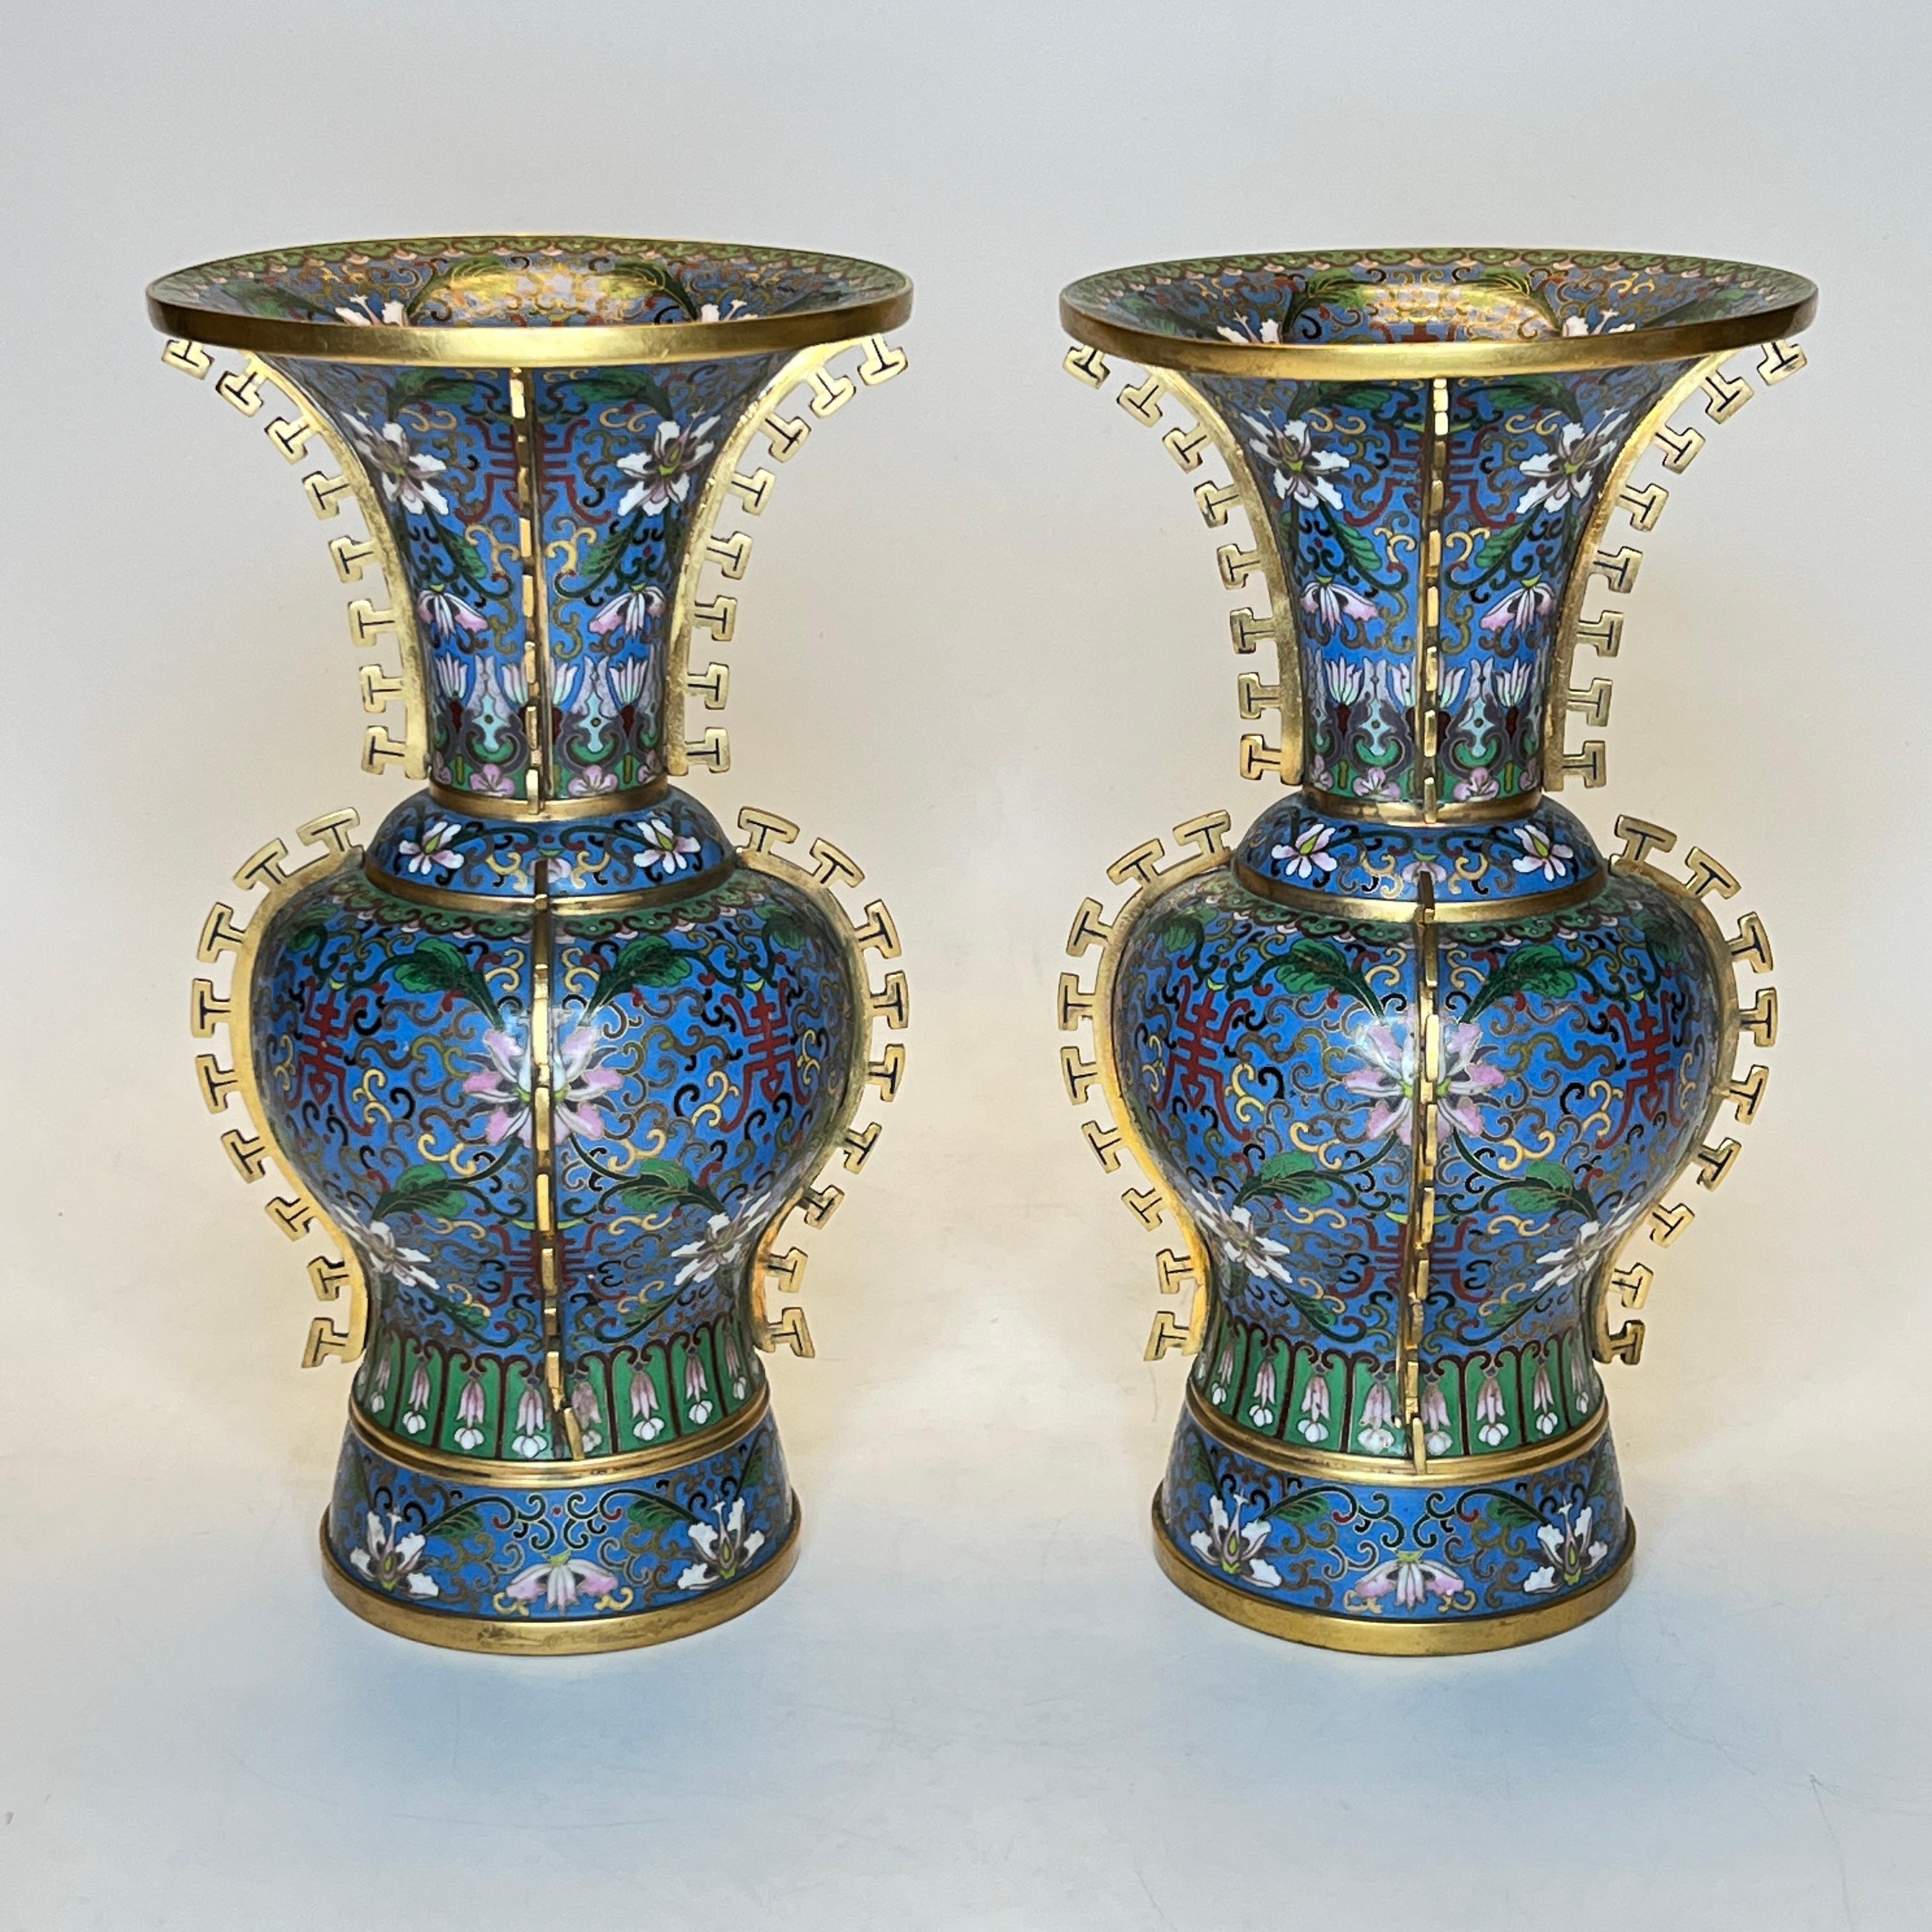 Pair Chinese cloisonne enamel vases with floral designs on blue ground and gilt mounts representing stylized dorsal fins of a dragon.